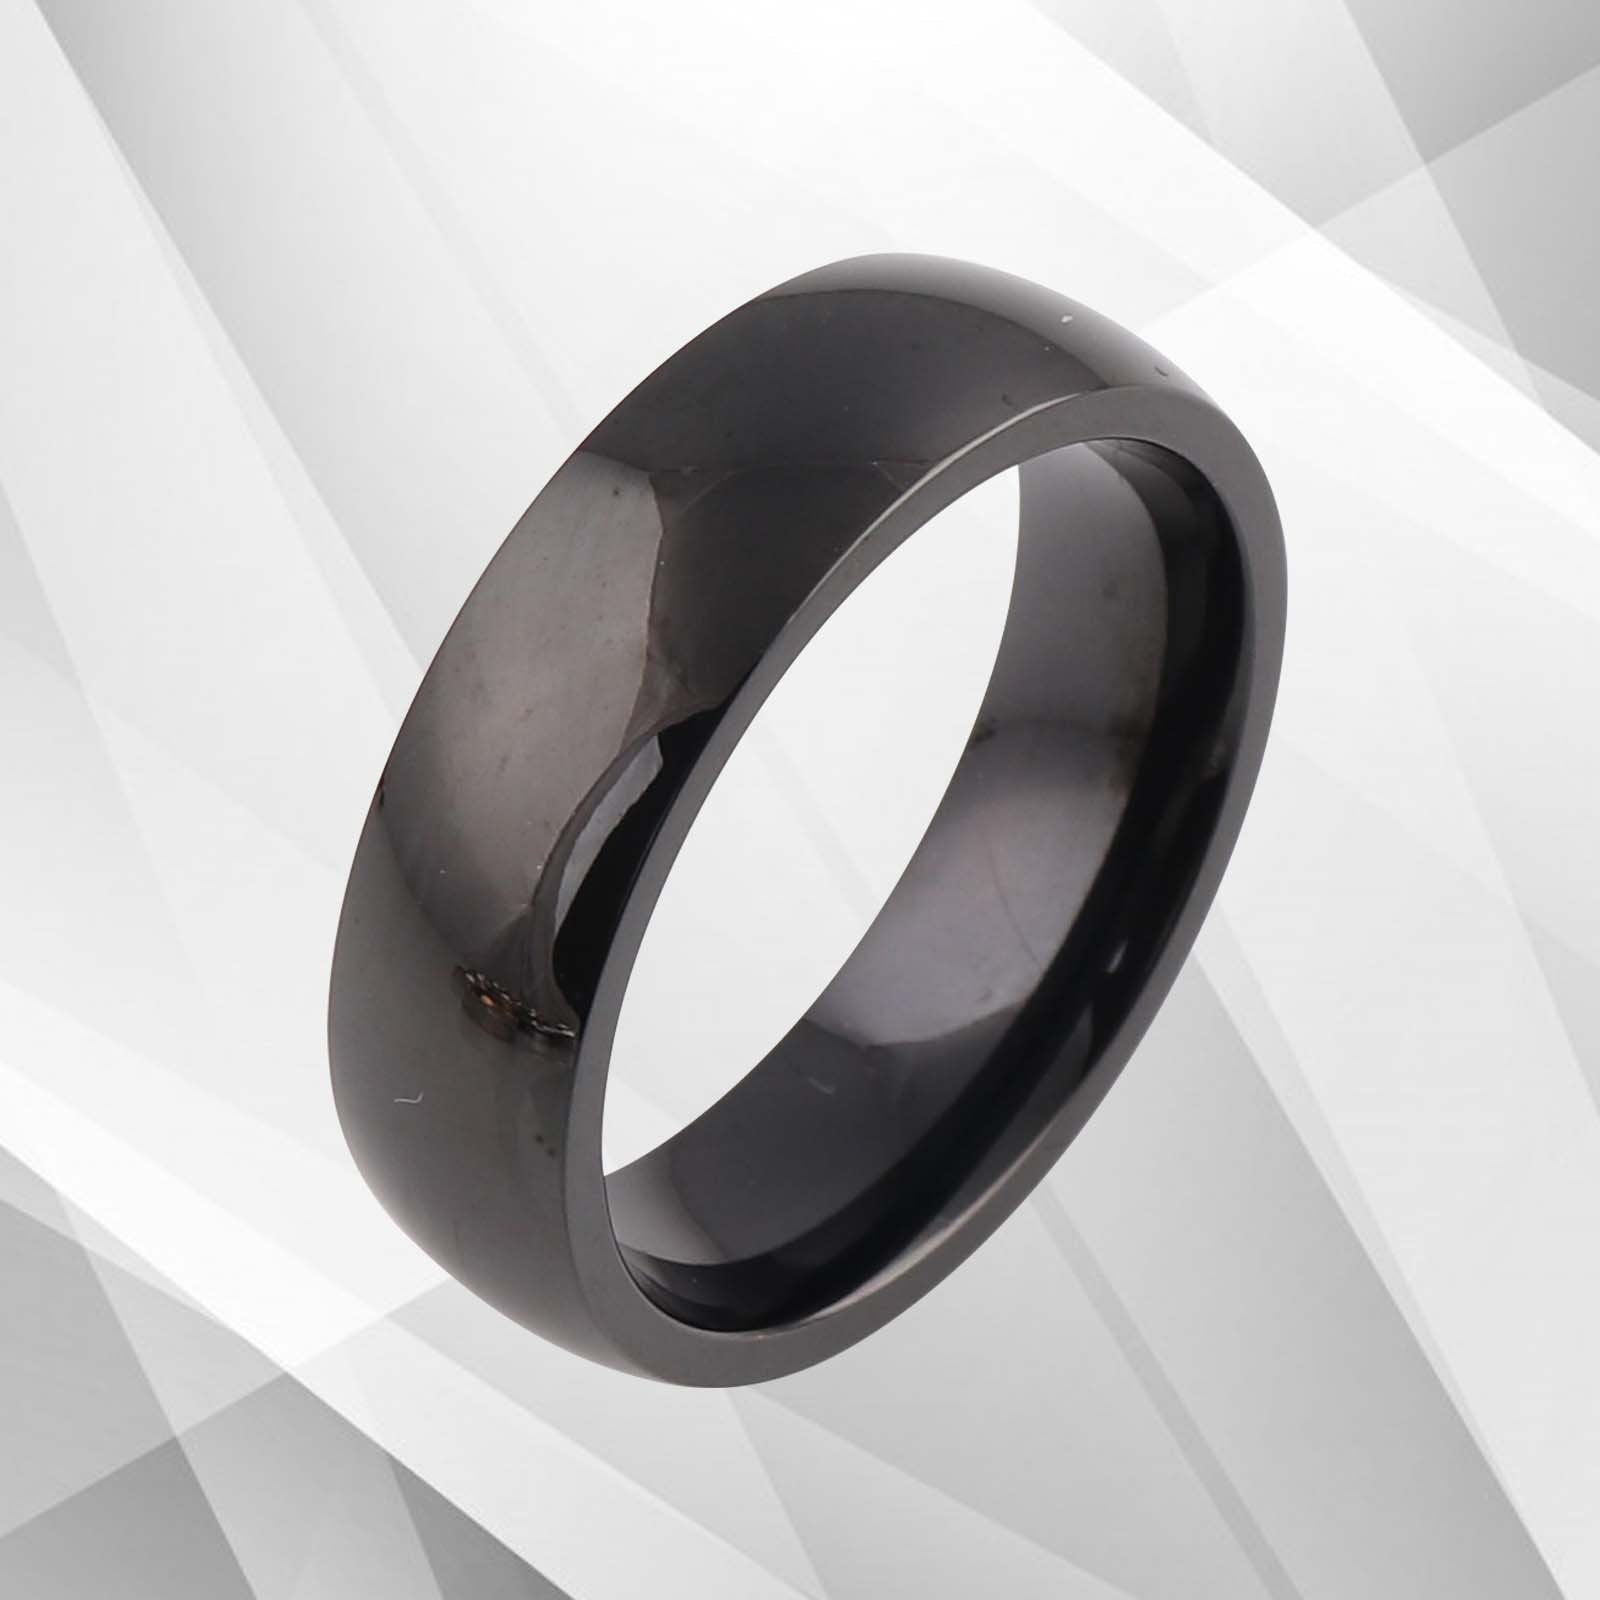 Gorgeous 6mm Black Tungsten Carbide Wedding Band for Men - D-Shape Comfort Fit Ring for Groom, Anniversary, Engagement - Jewelry & Watches - Bijou Her -  -  - 